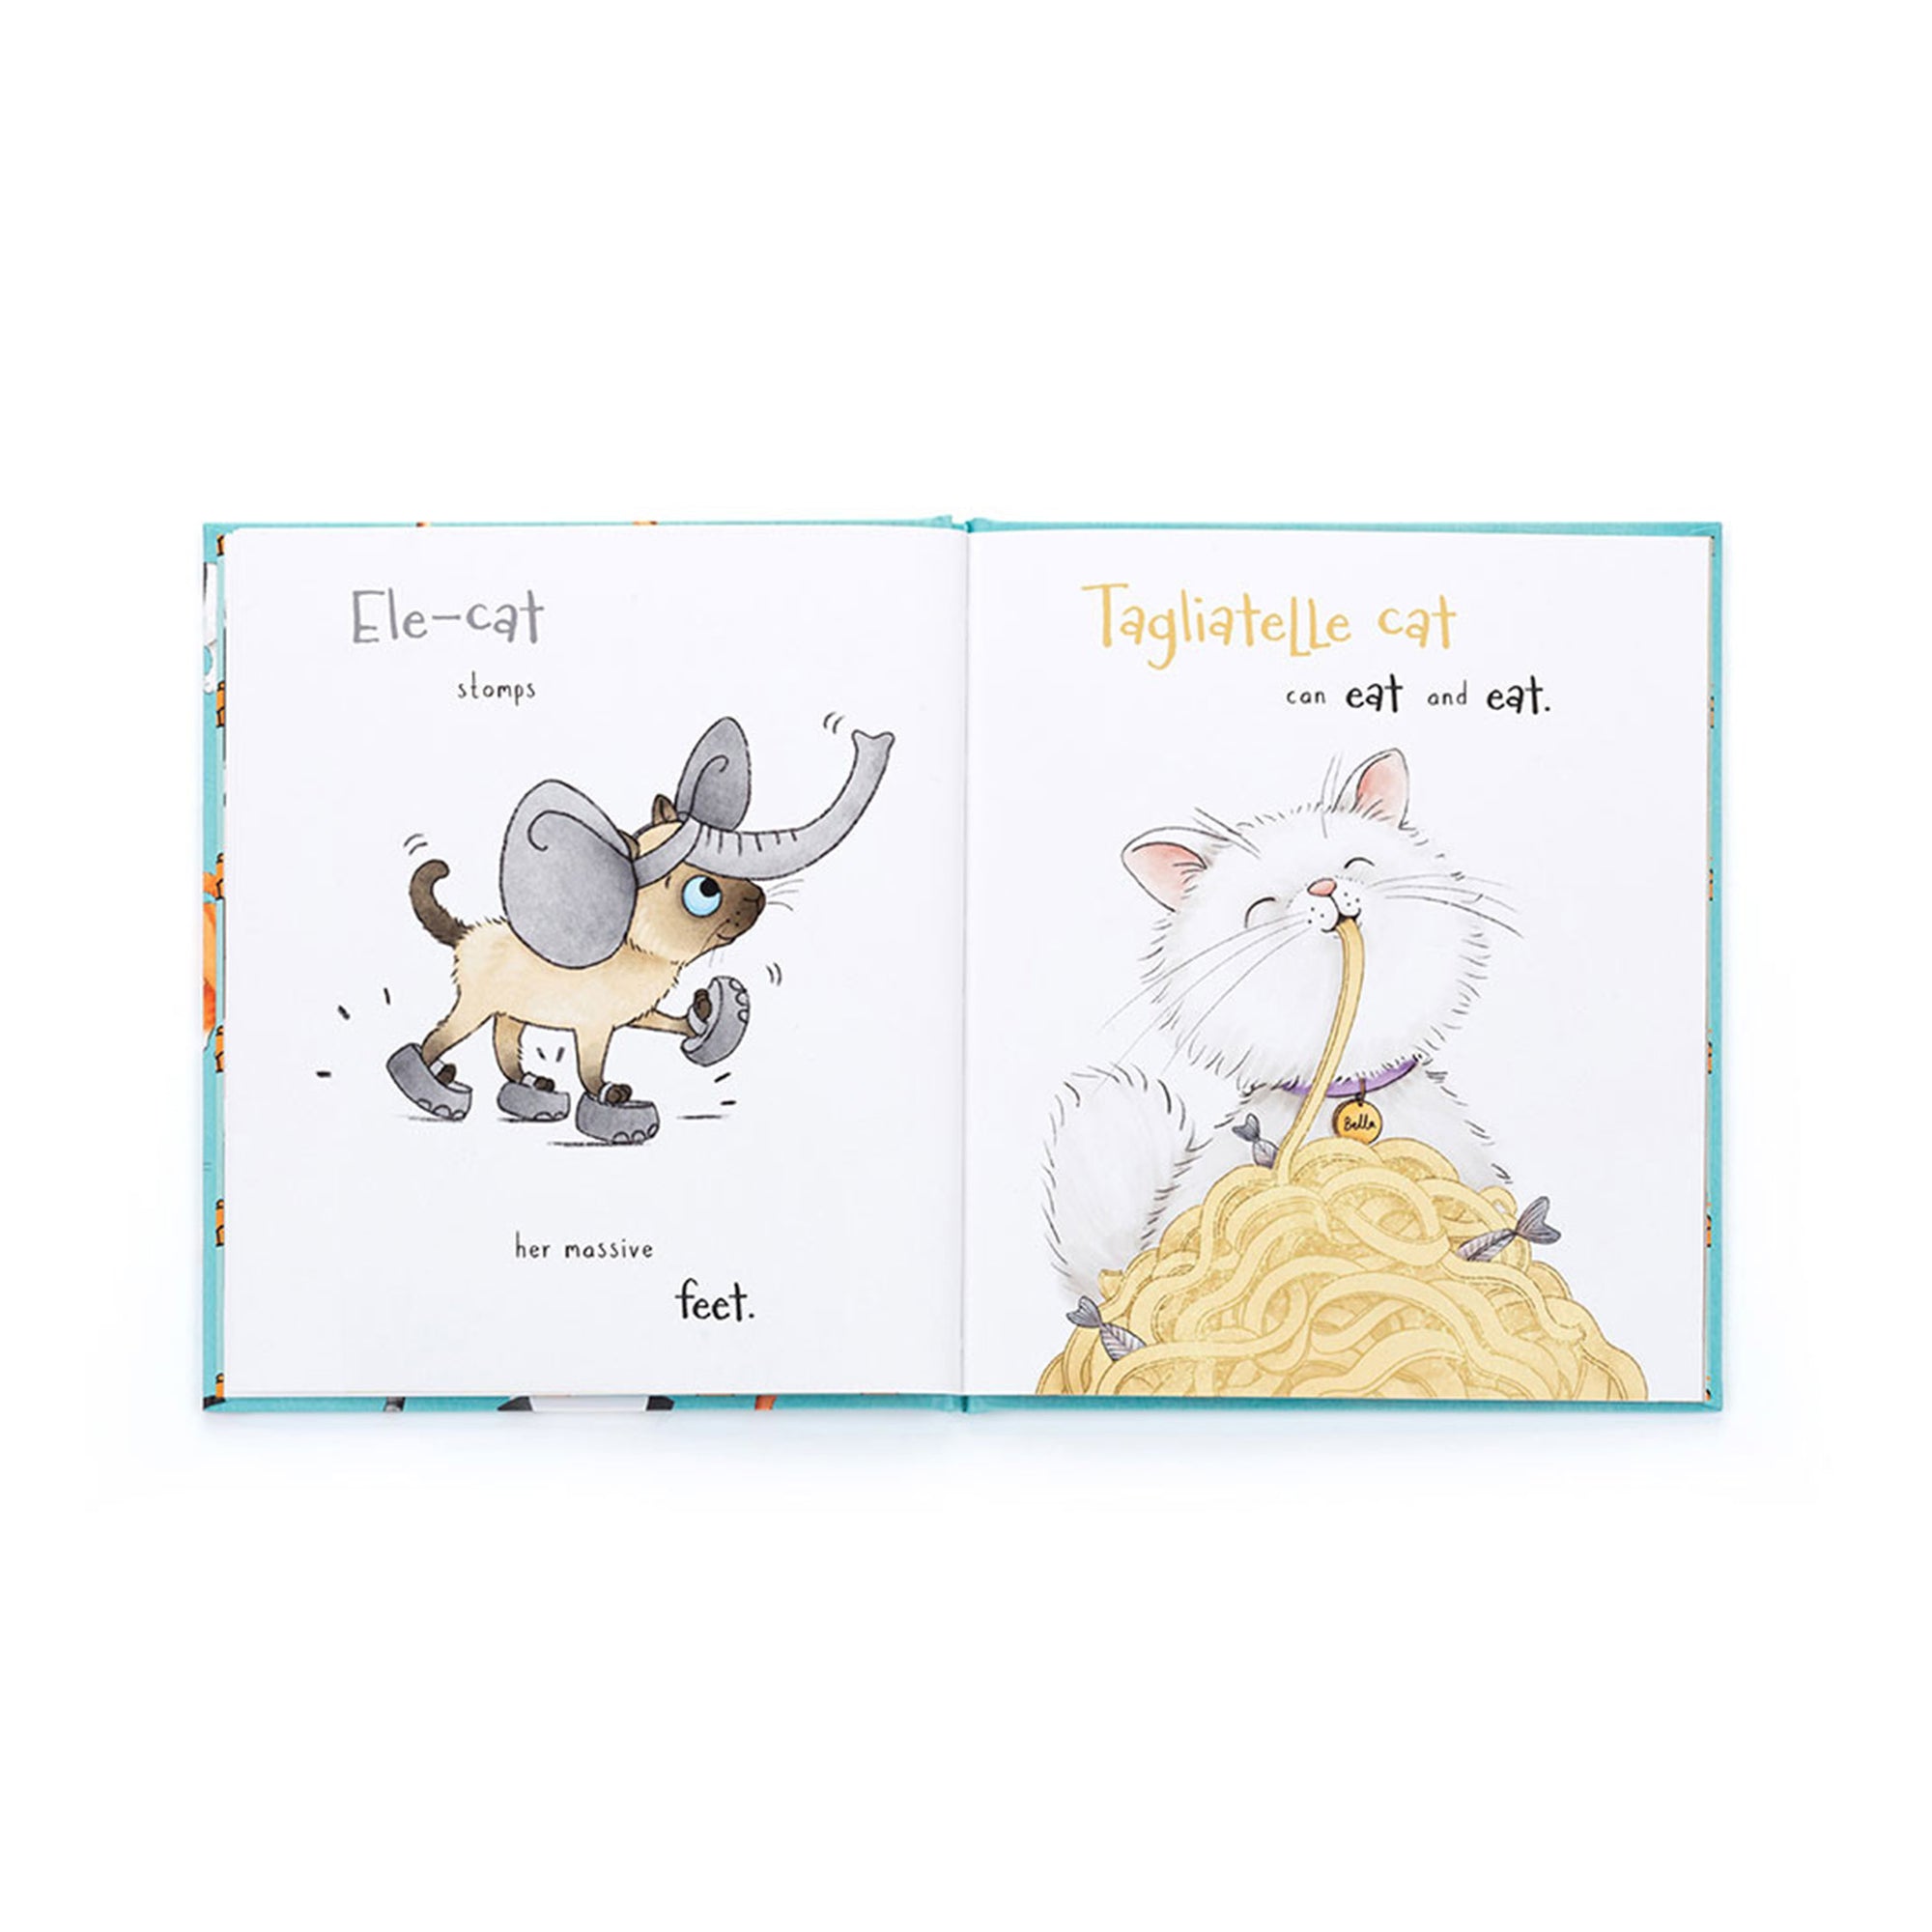 The Elly Store | Jellycat All Kinds of Cats Book